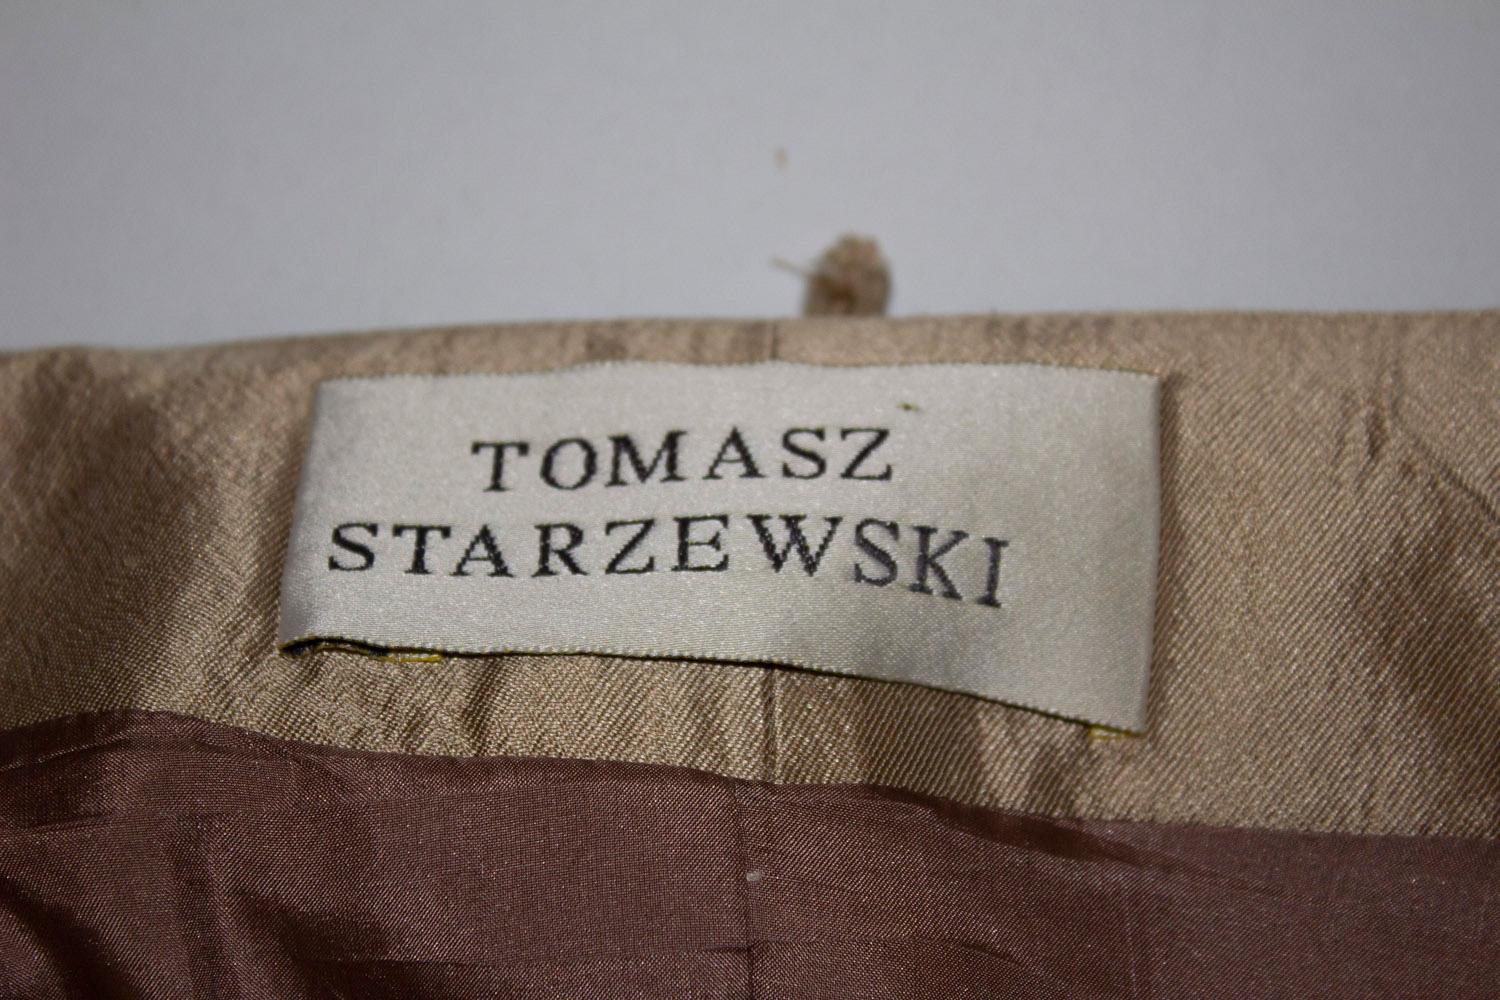 A stunning vintage jacket by Tomasz Starzewski. In a soft gold fabric, the jacket has a v neckline, self fabric wide belt  and great tailoring . It is fully lined.  Measurements: Bust  up to 36'', length 22''